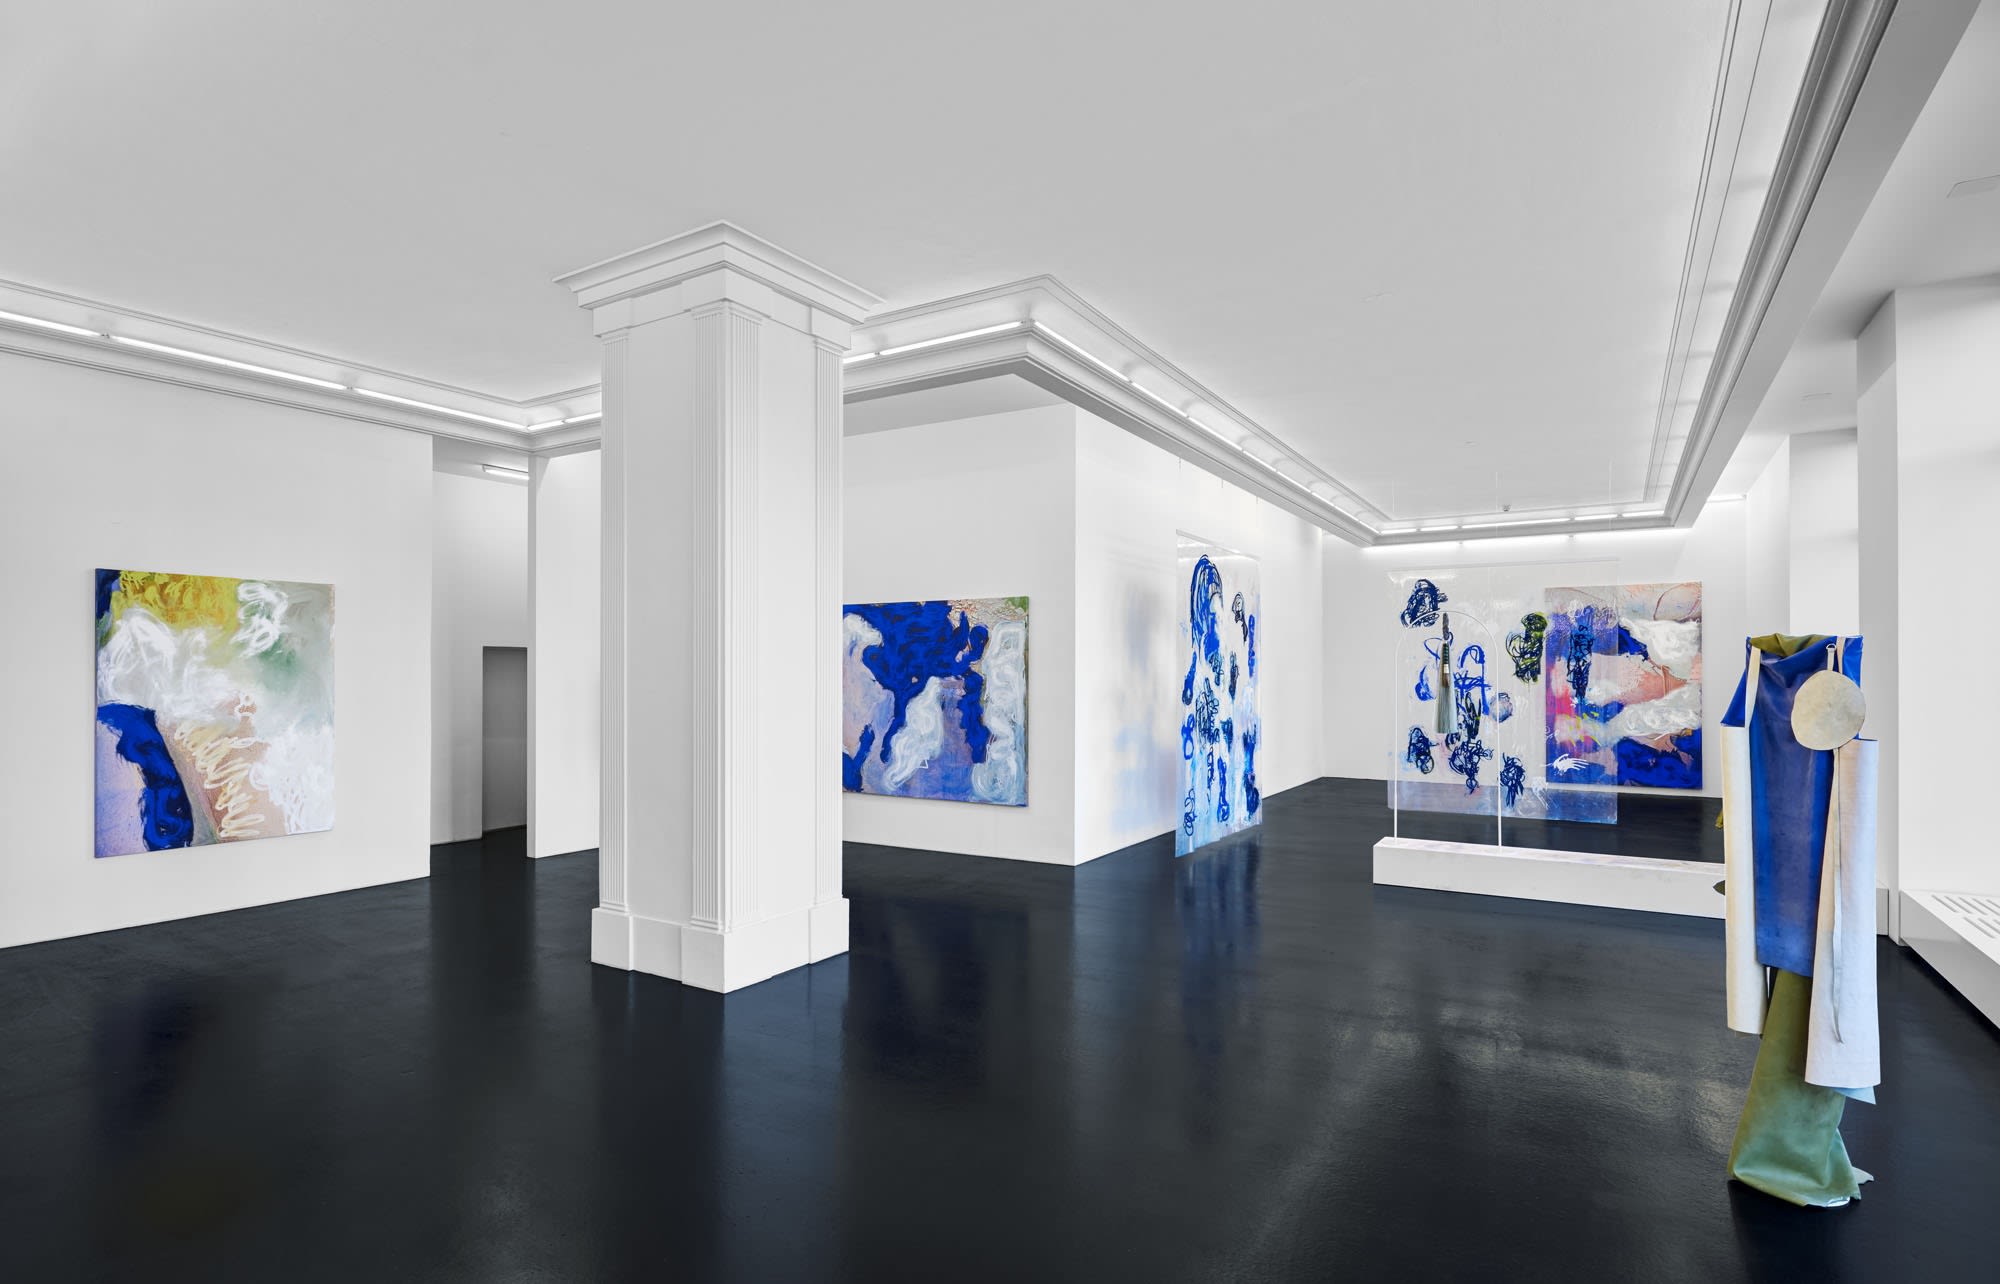 Donna Huanca Surrogate Painteen Installation View September 2 - October 28, 2016 Peres Projects, Berlin Photographed by: Adrian Parvulescu